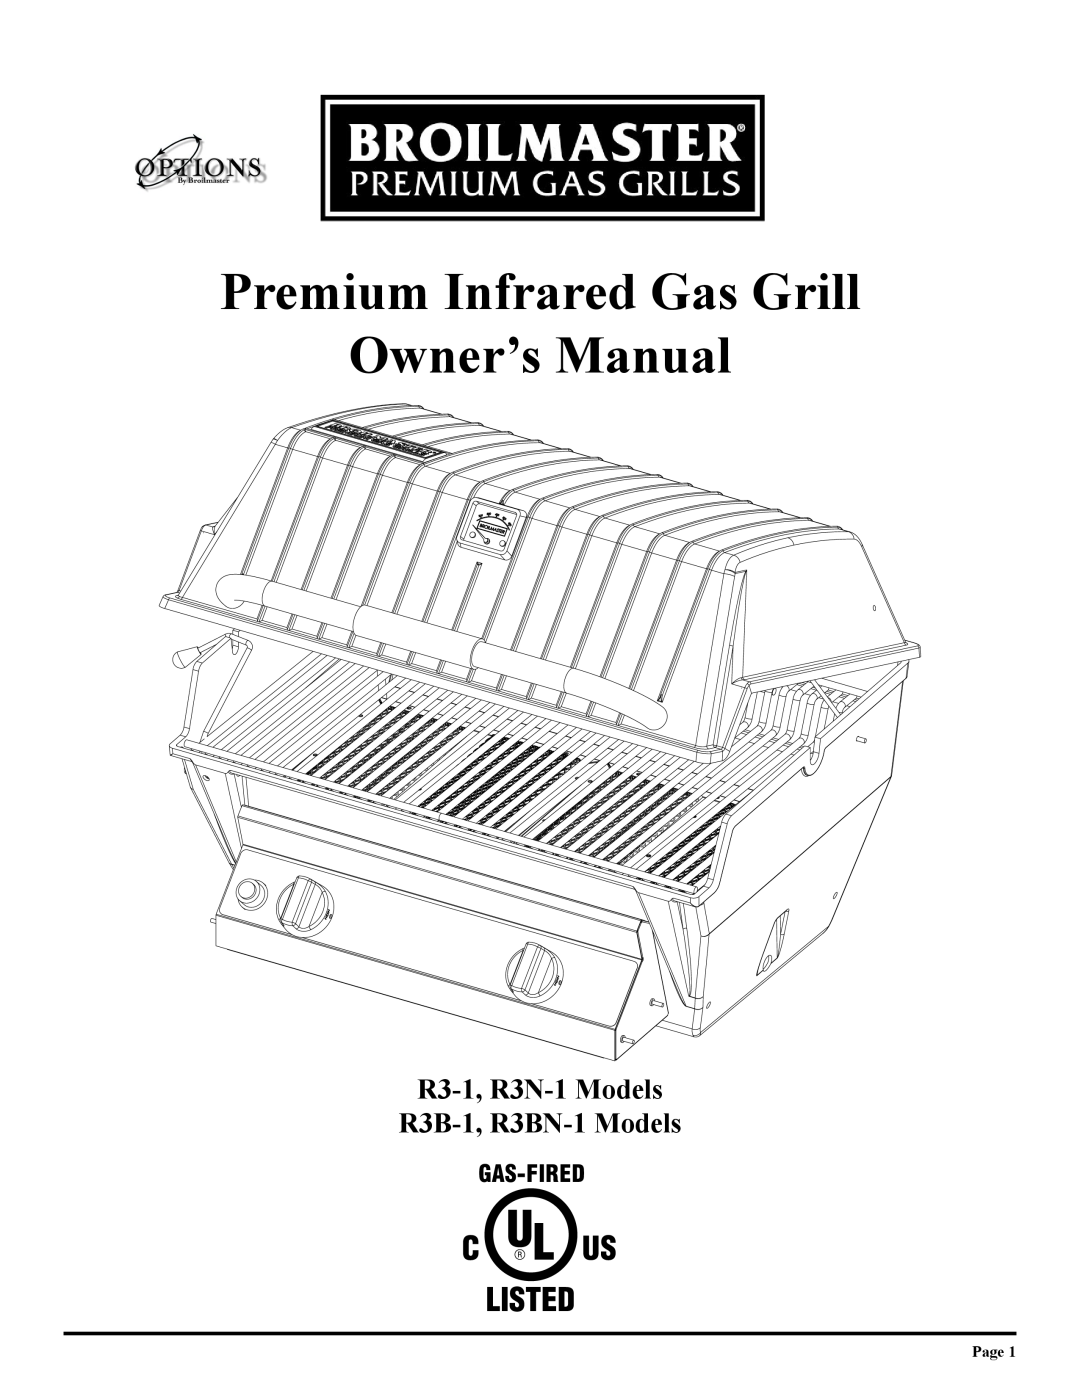 Broilmaster owner manual Premium Infrared Gas Grill Owner’s Manual, R3-1, R3N-1 Models R3B-1, R3BN-1 Models, Gas-Fired 